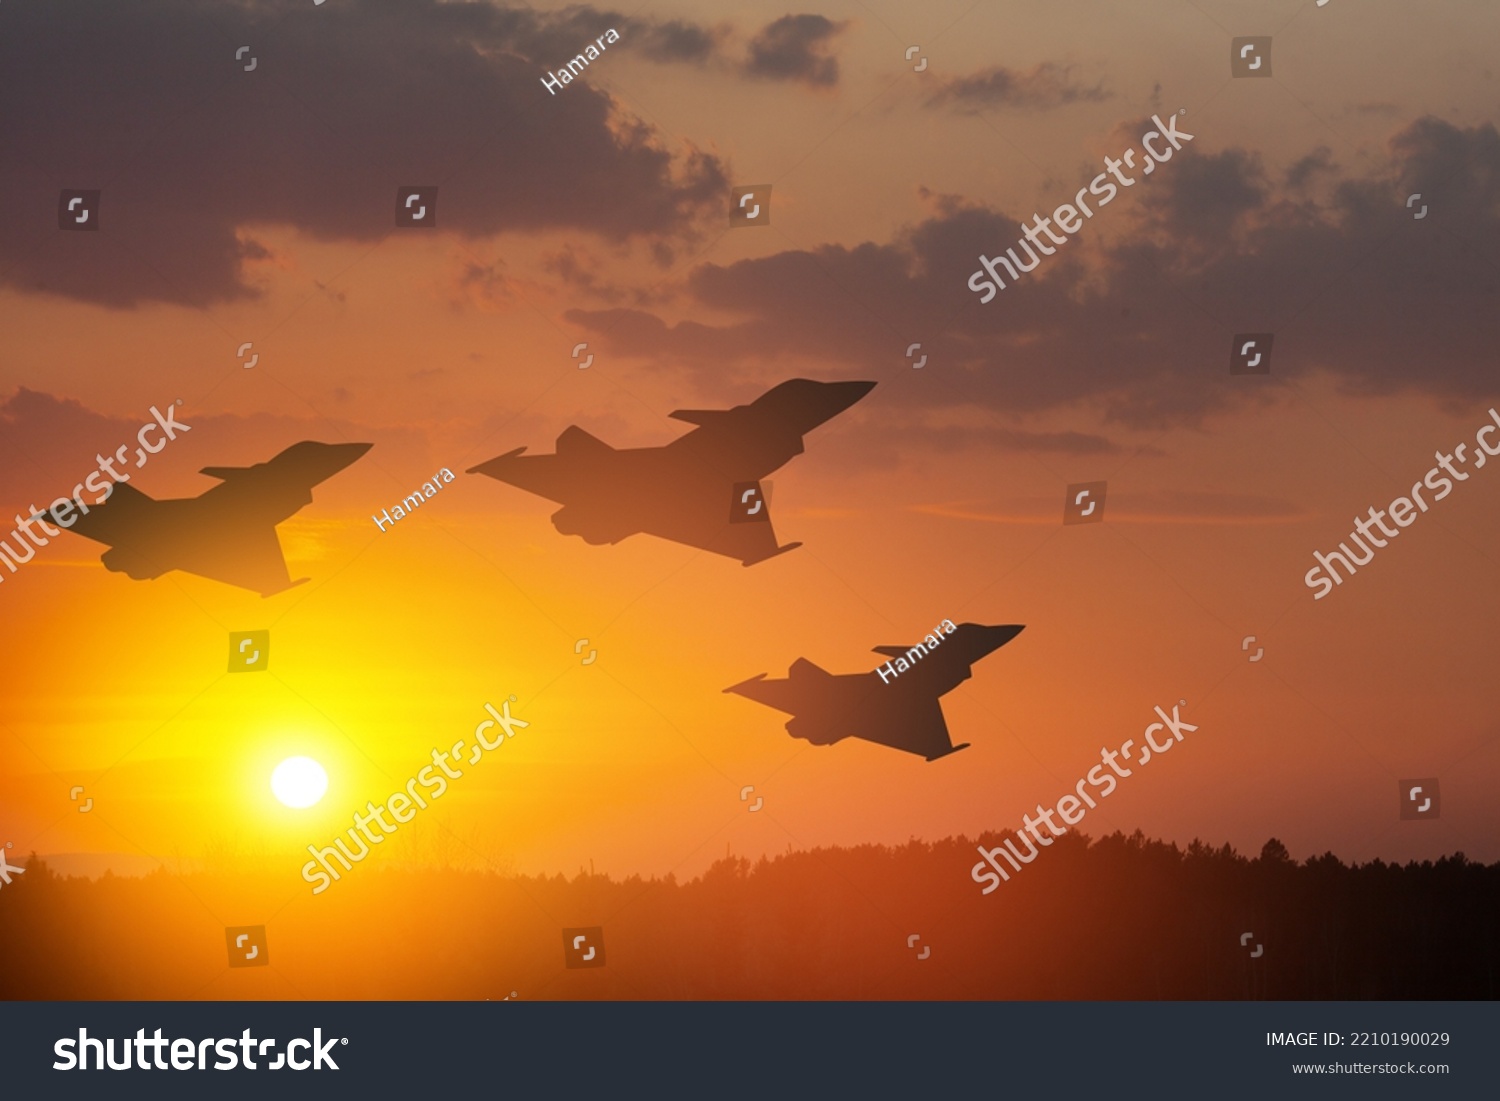 Air Force Day. Aircraft silhouettes on background of sunset. #2210190029